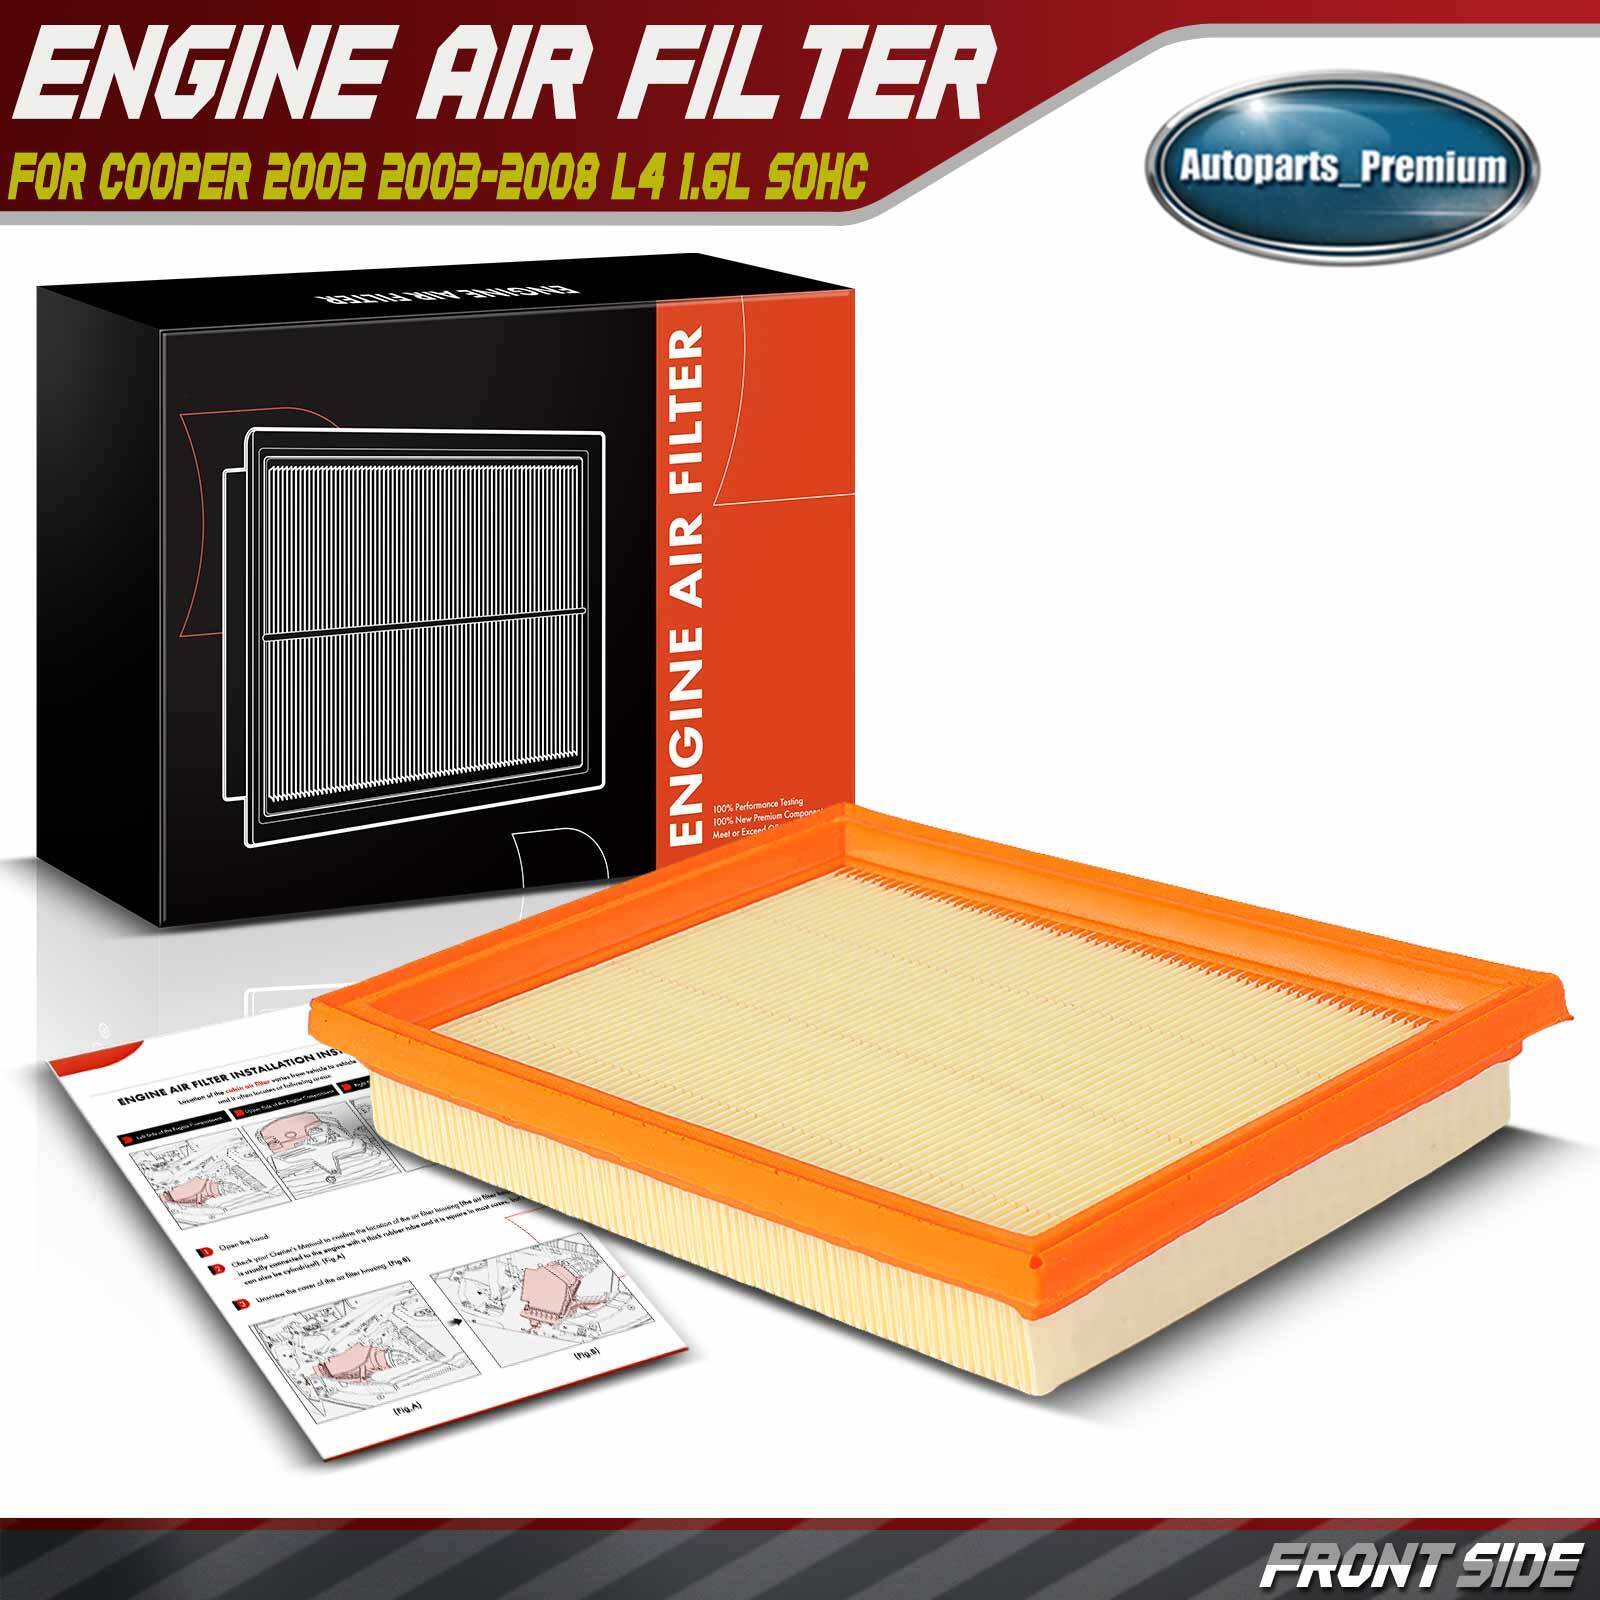 1x New Engine Air Filter for Cooper 2002 2003 2004 2005 2006 2007 2008 1.6L SOHC